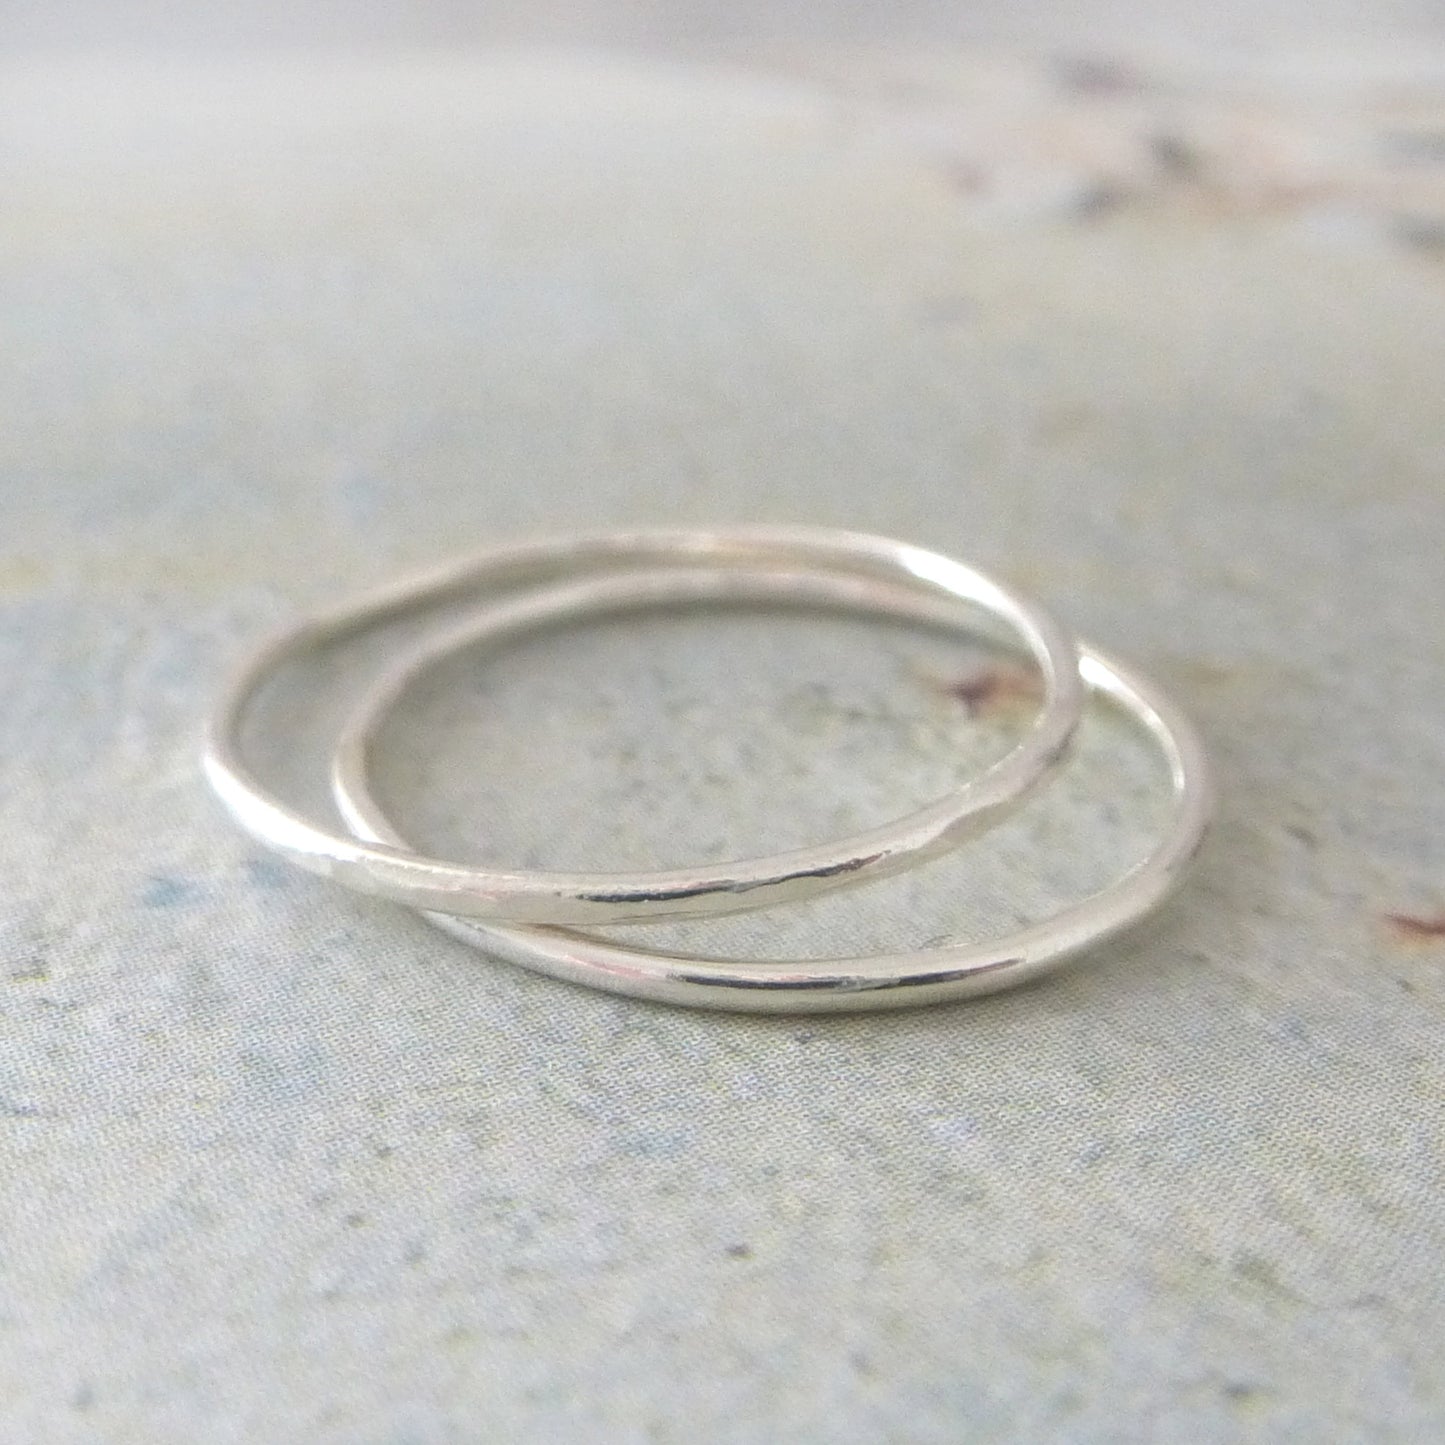 Skinny hammered band ring - 9ct white gold